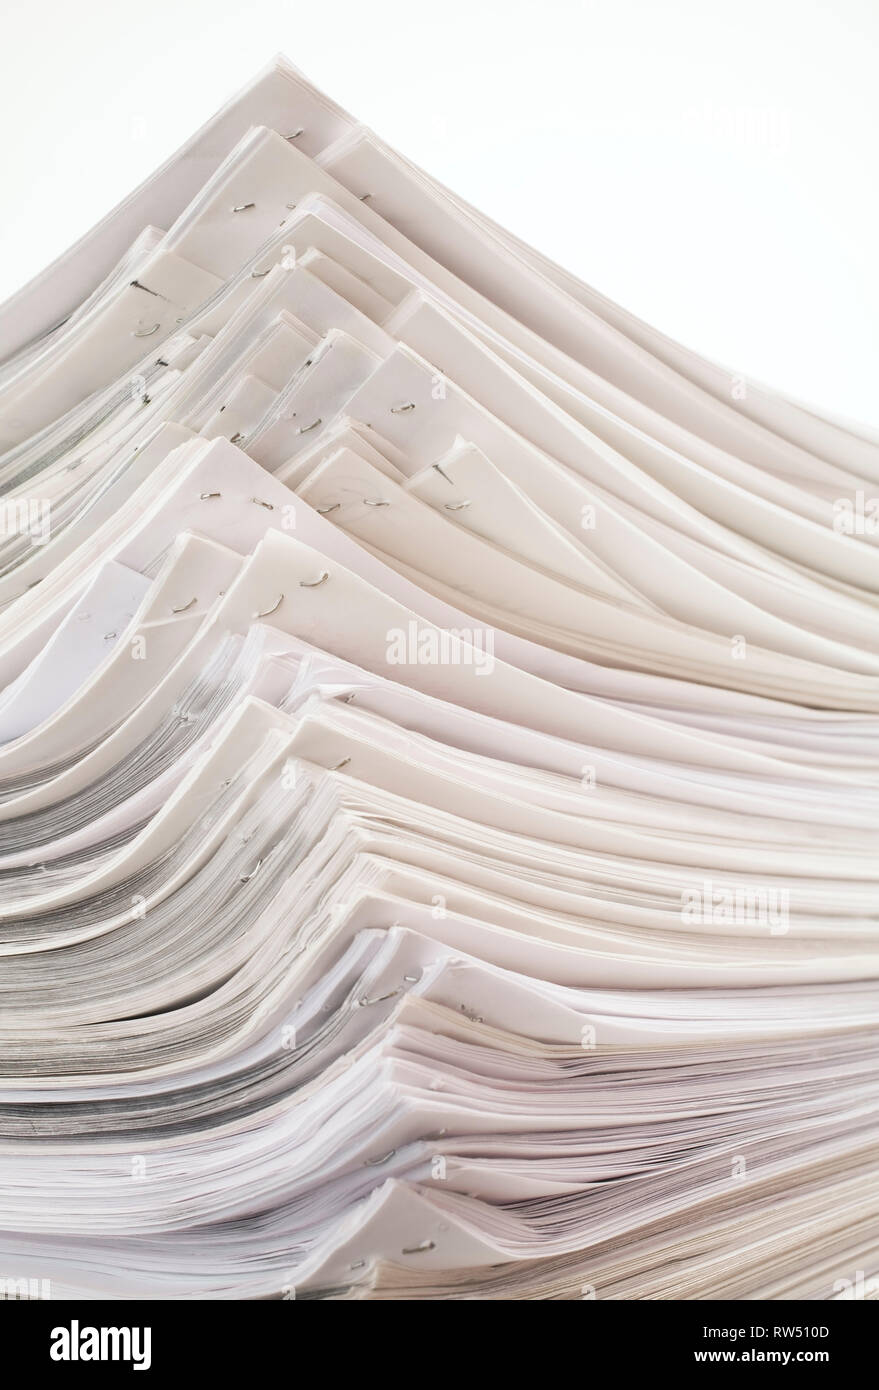 Stack Of Stapled White Sheets Of Office Paper On A White